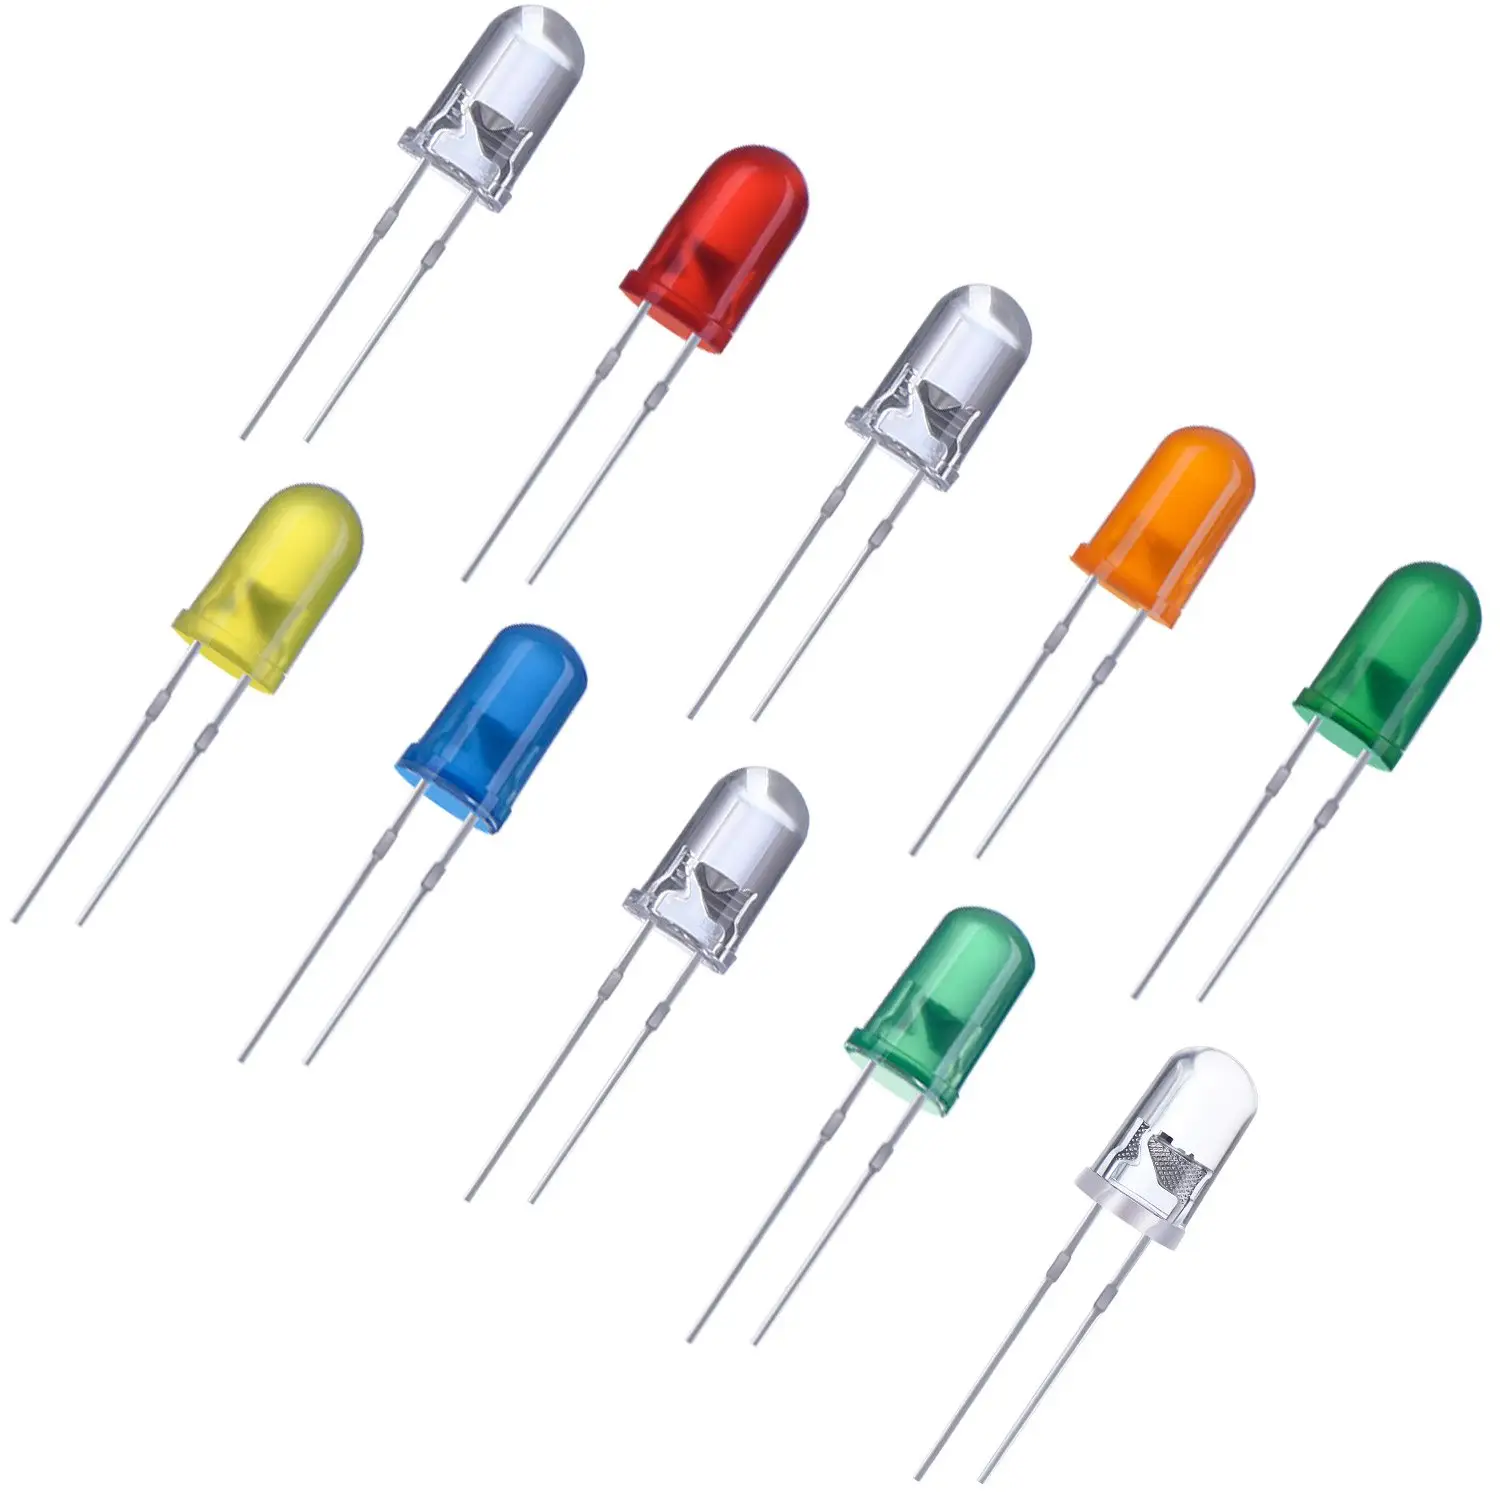 3mm LED Light Diodes LED Circuit Assorted Kit For Science Project Experiment (Multi-Colored - 5 Color)